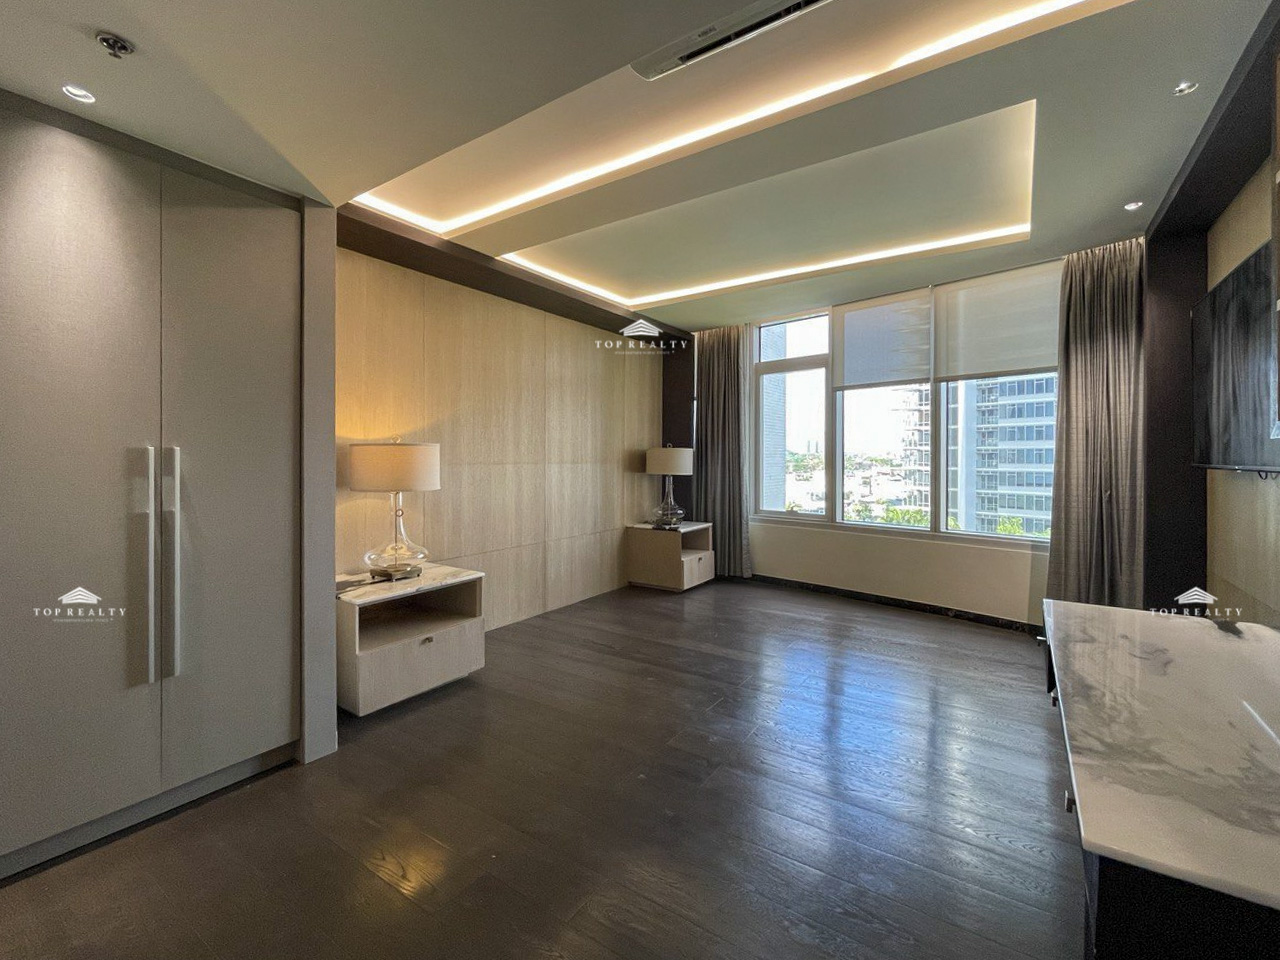 For Rent: 3 Bedroom Condo in Rockwell, Makati City